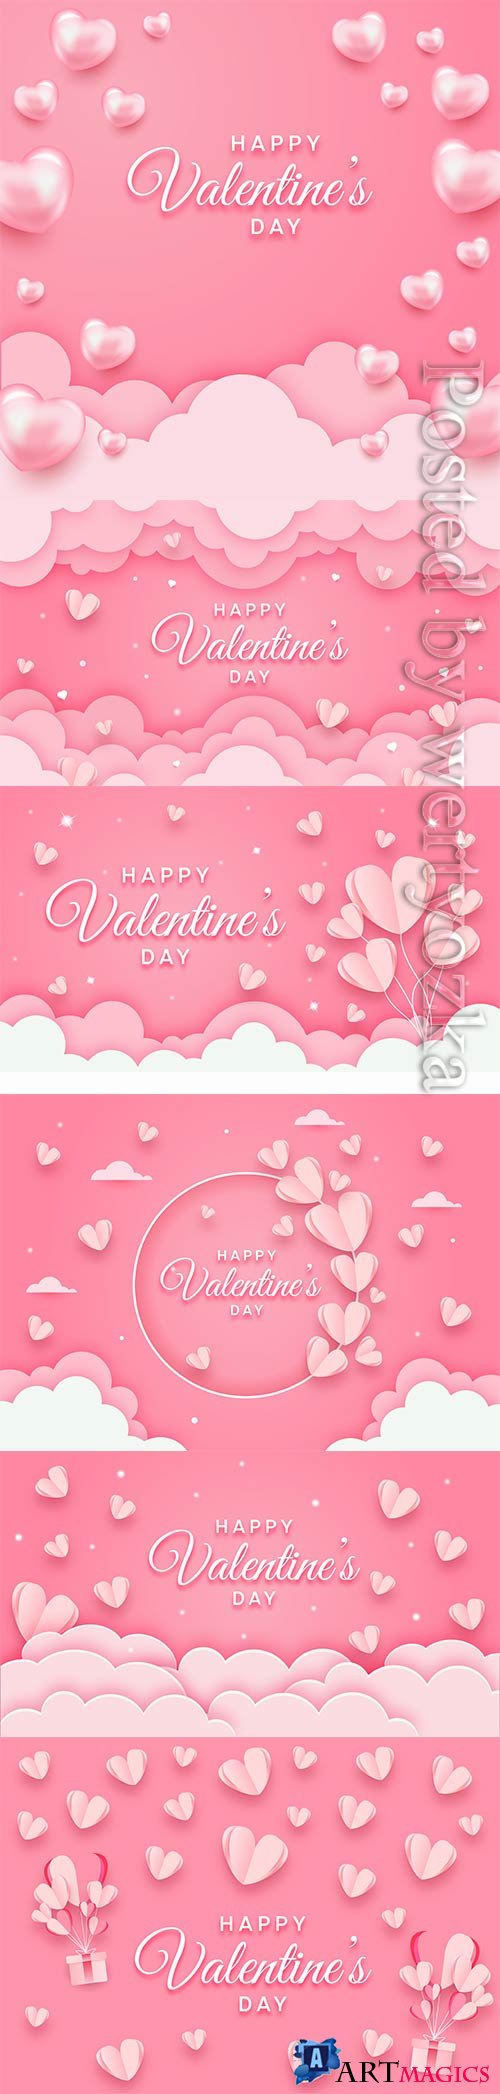 Happy valentines day concept in paper